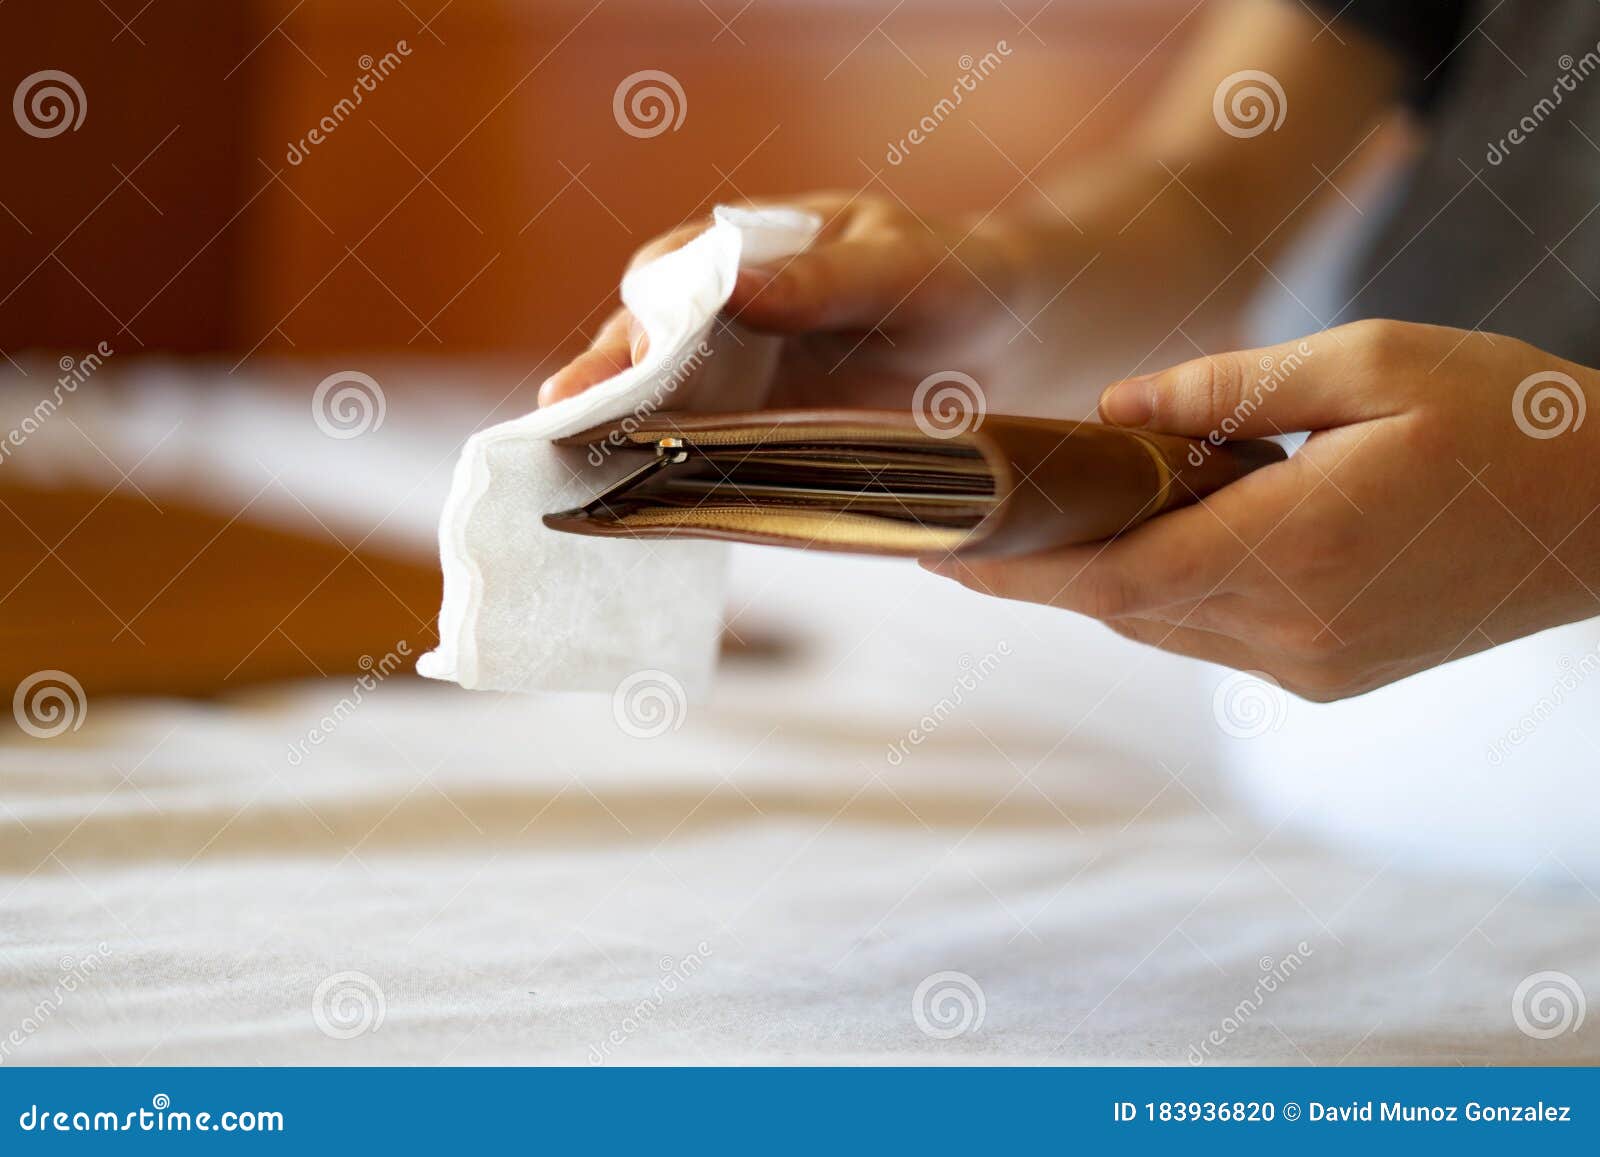 man disinfecting his wallet with a disinfecting wipe.